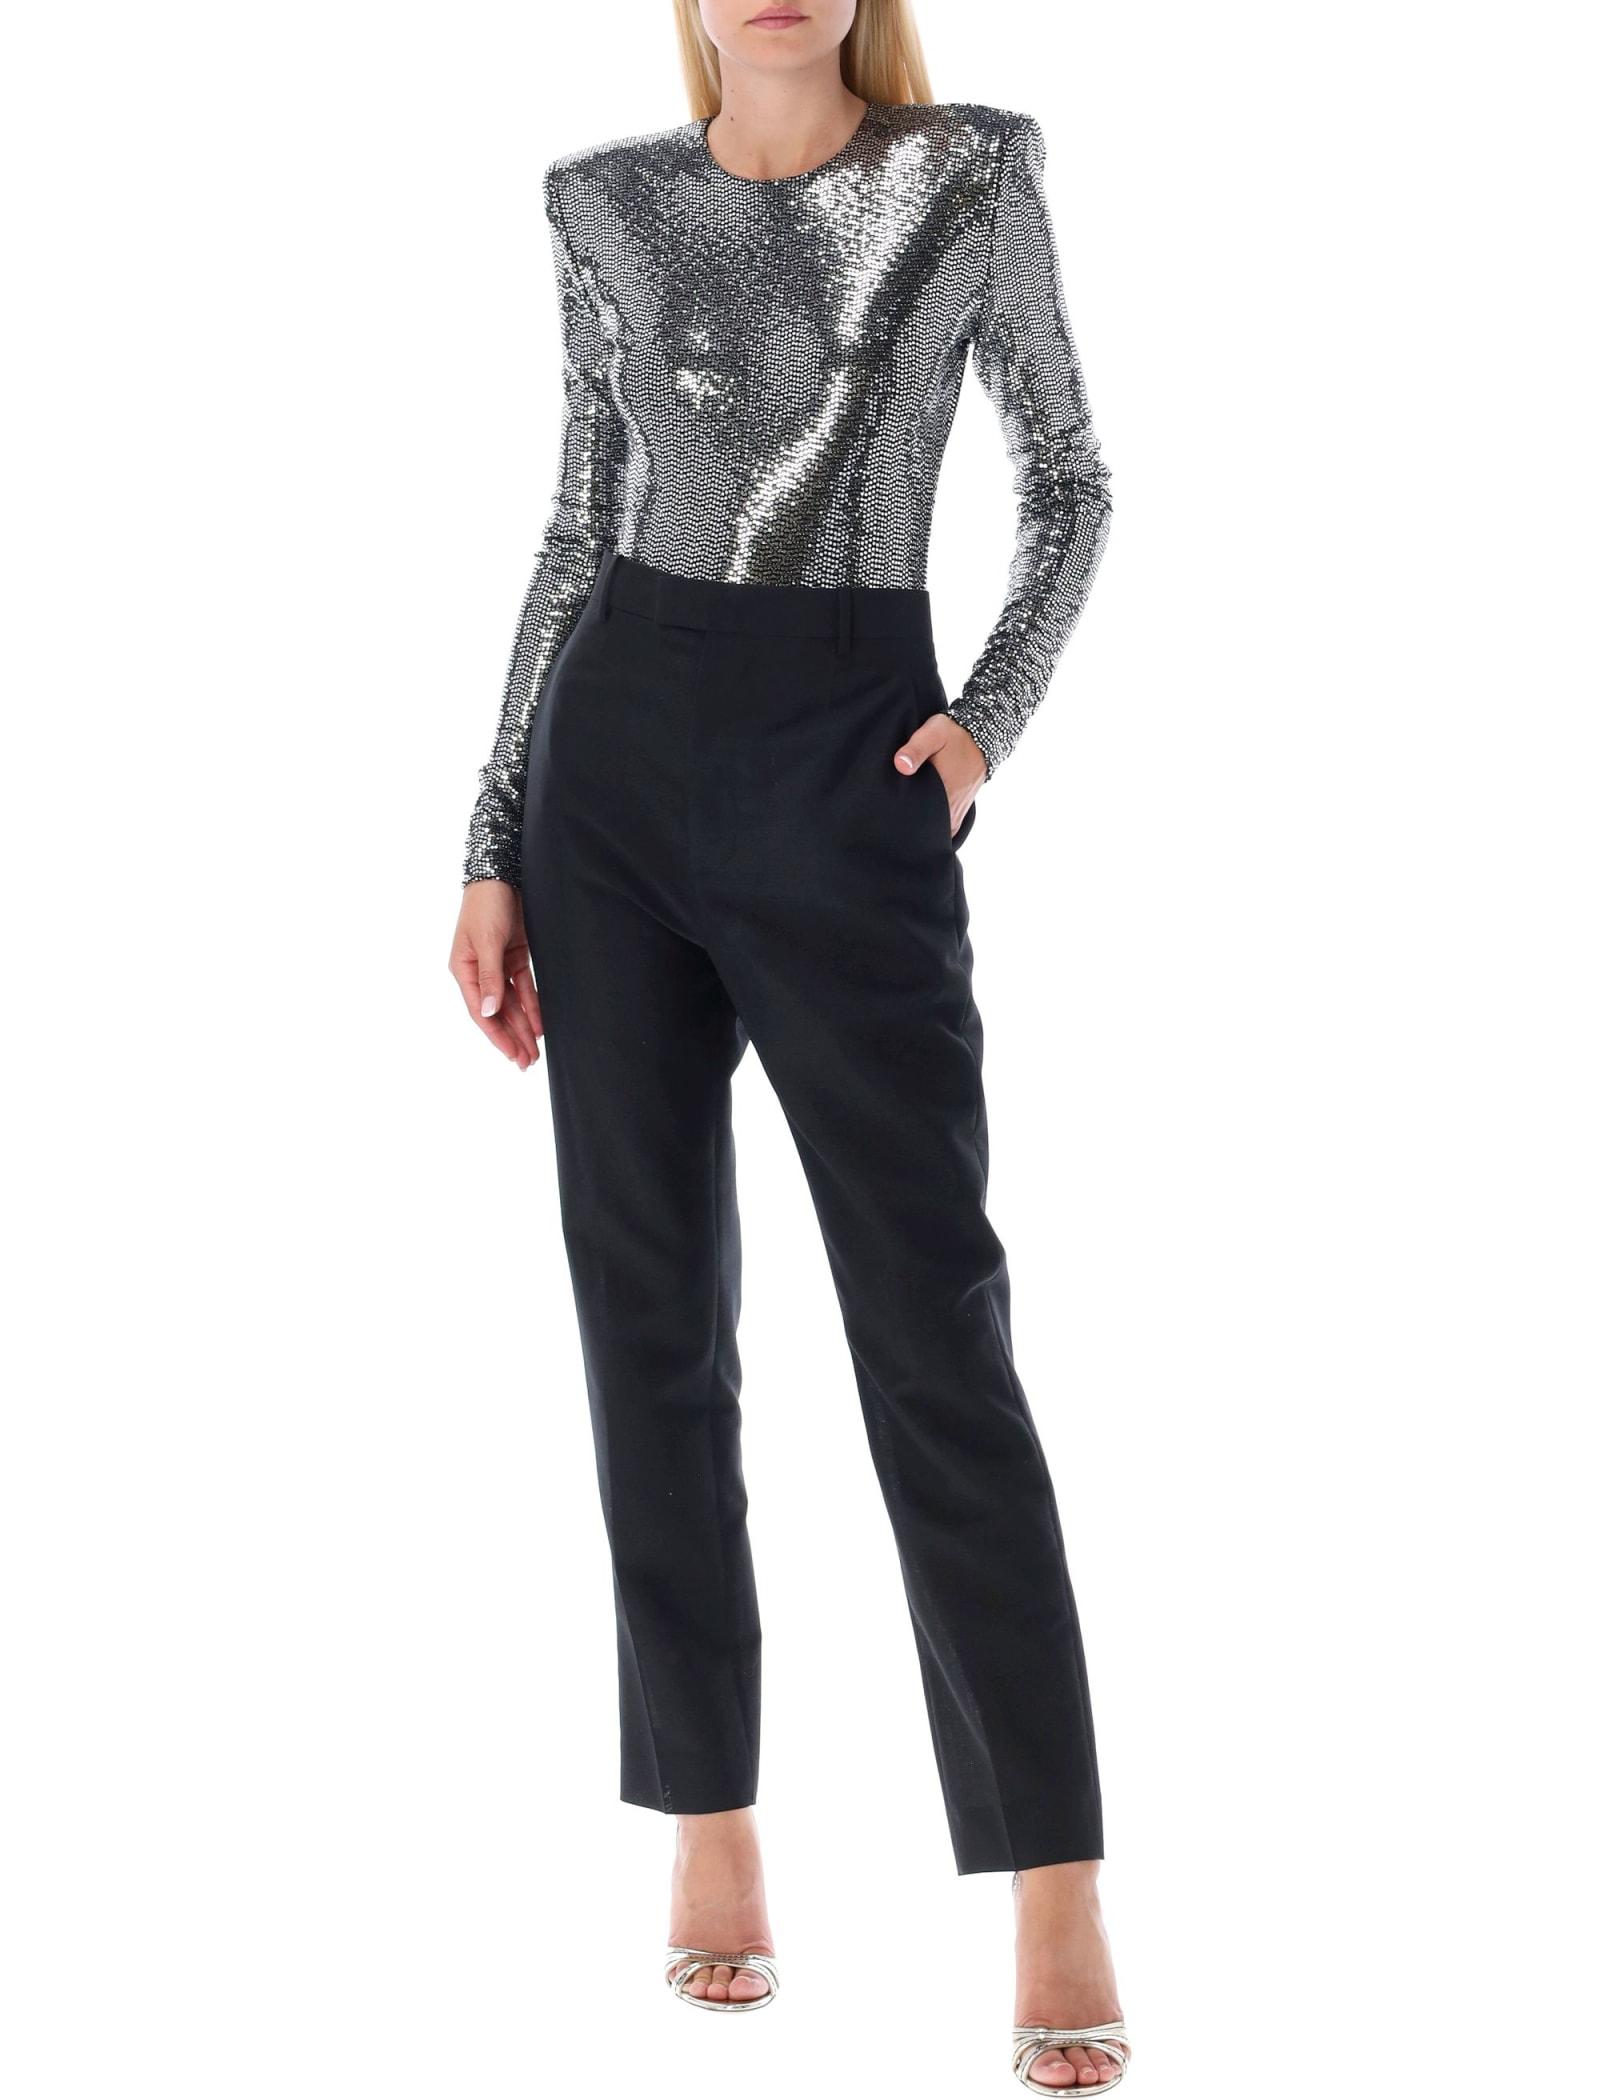 Womens Clothing Lingerie Bodysuits Metallic - Save 9% Alexandre Vauthier Synthetic Laminated Polka-dots Bodysuit in Silver 